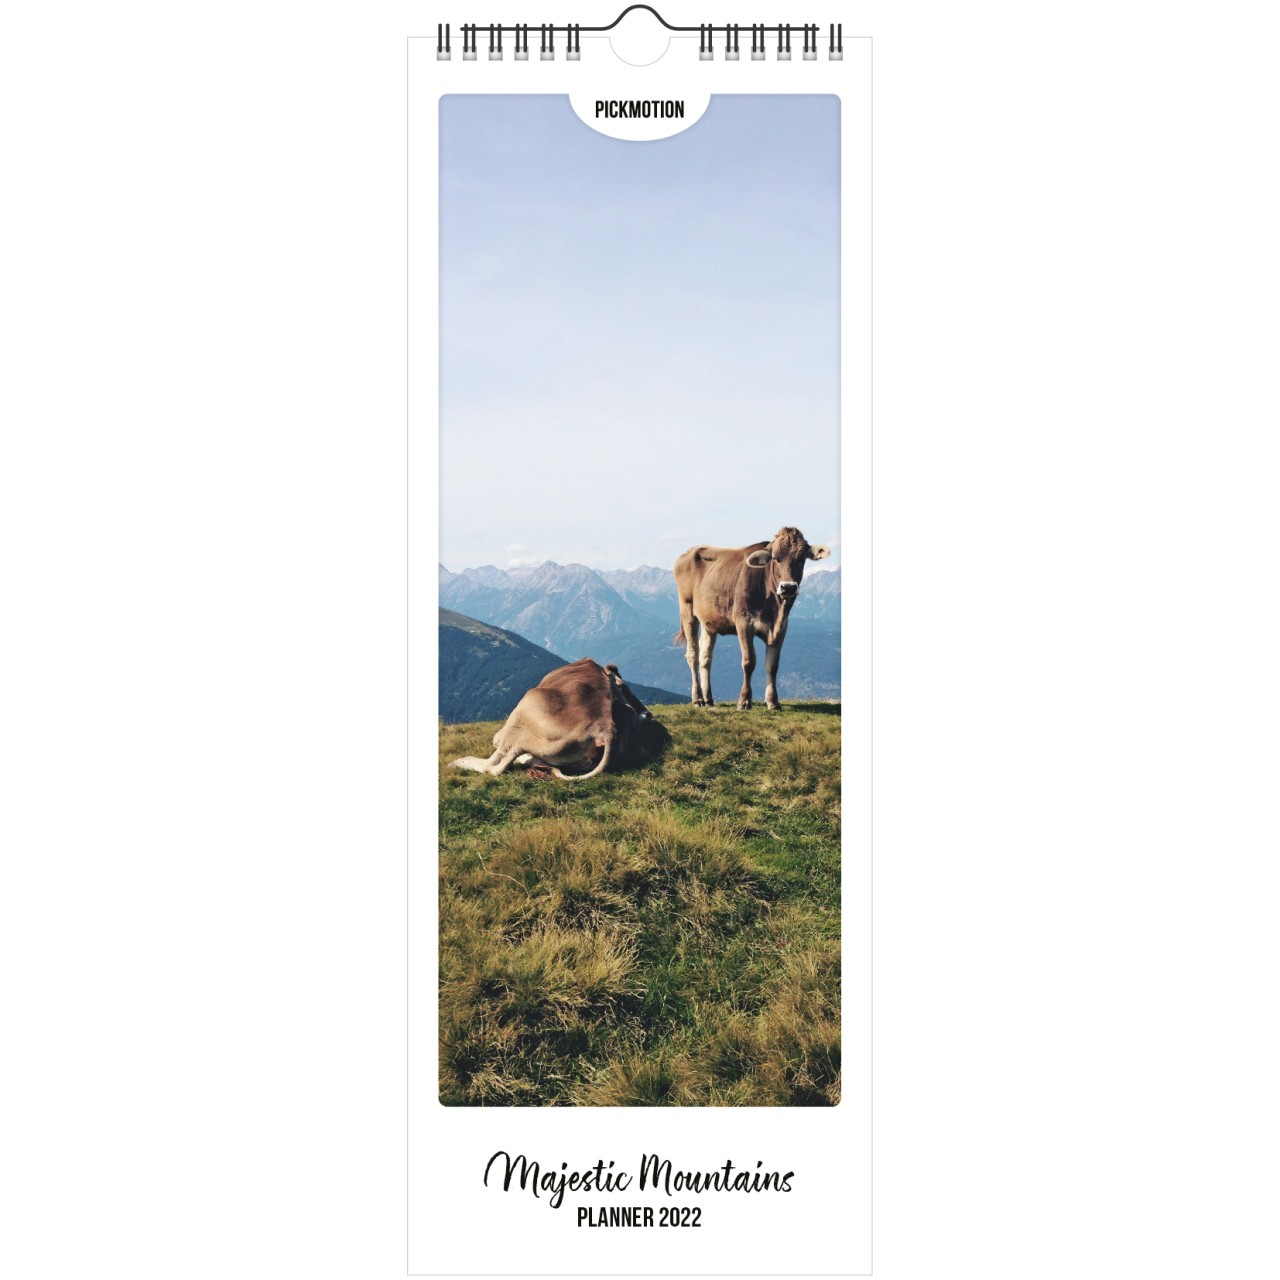 Majestic Mountains - Planner (Format 15x40cm)